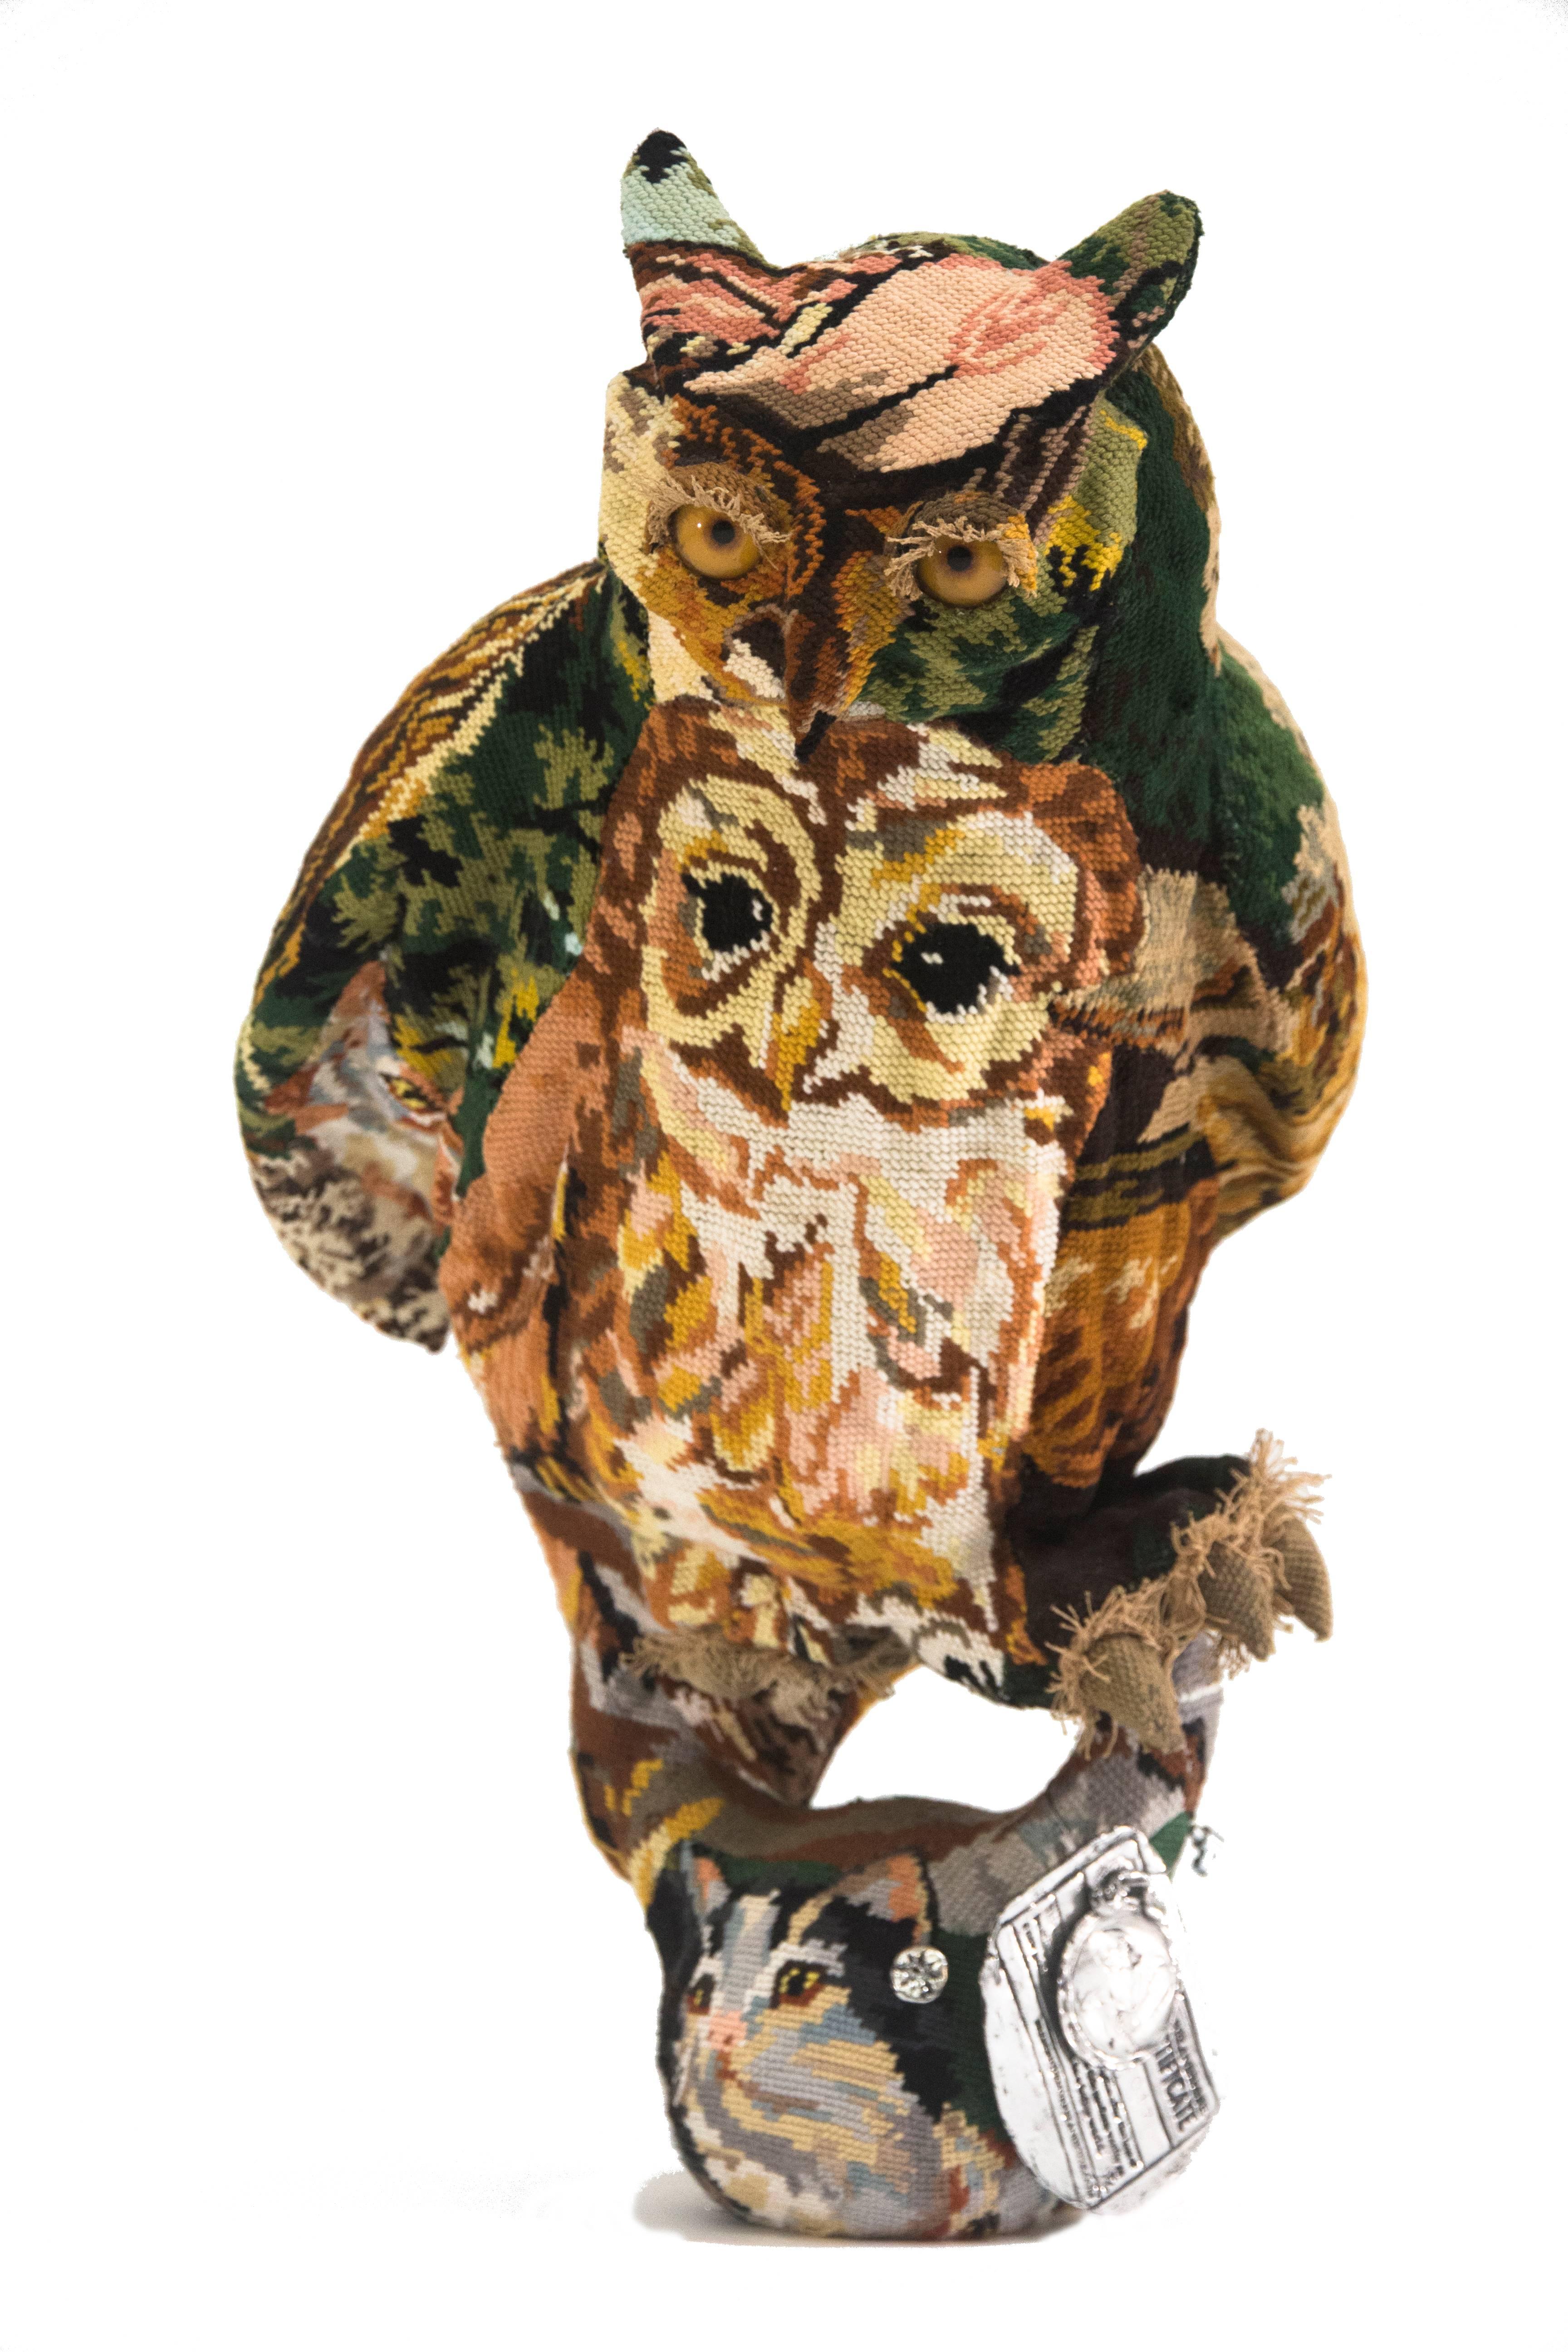 Frederique Morrel needlepoint Owly OS Born sculpture features handwoven cotton tapestry and glass eye details.